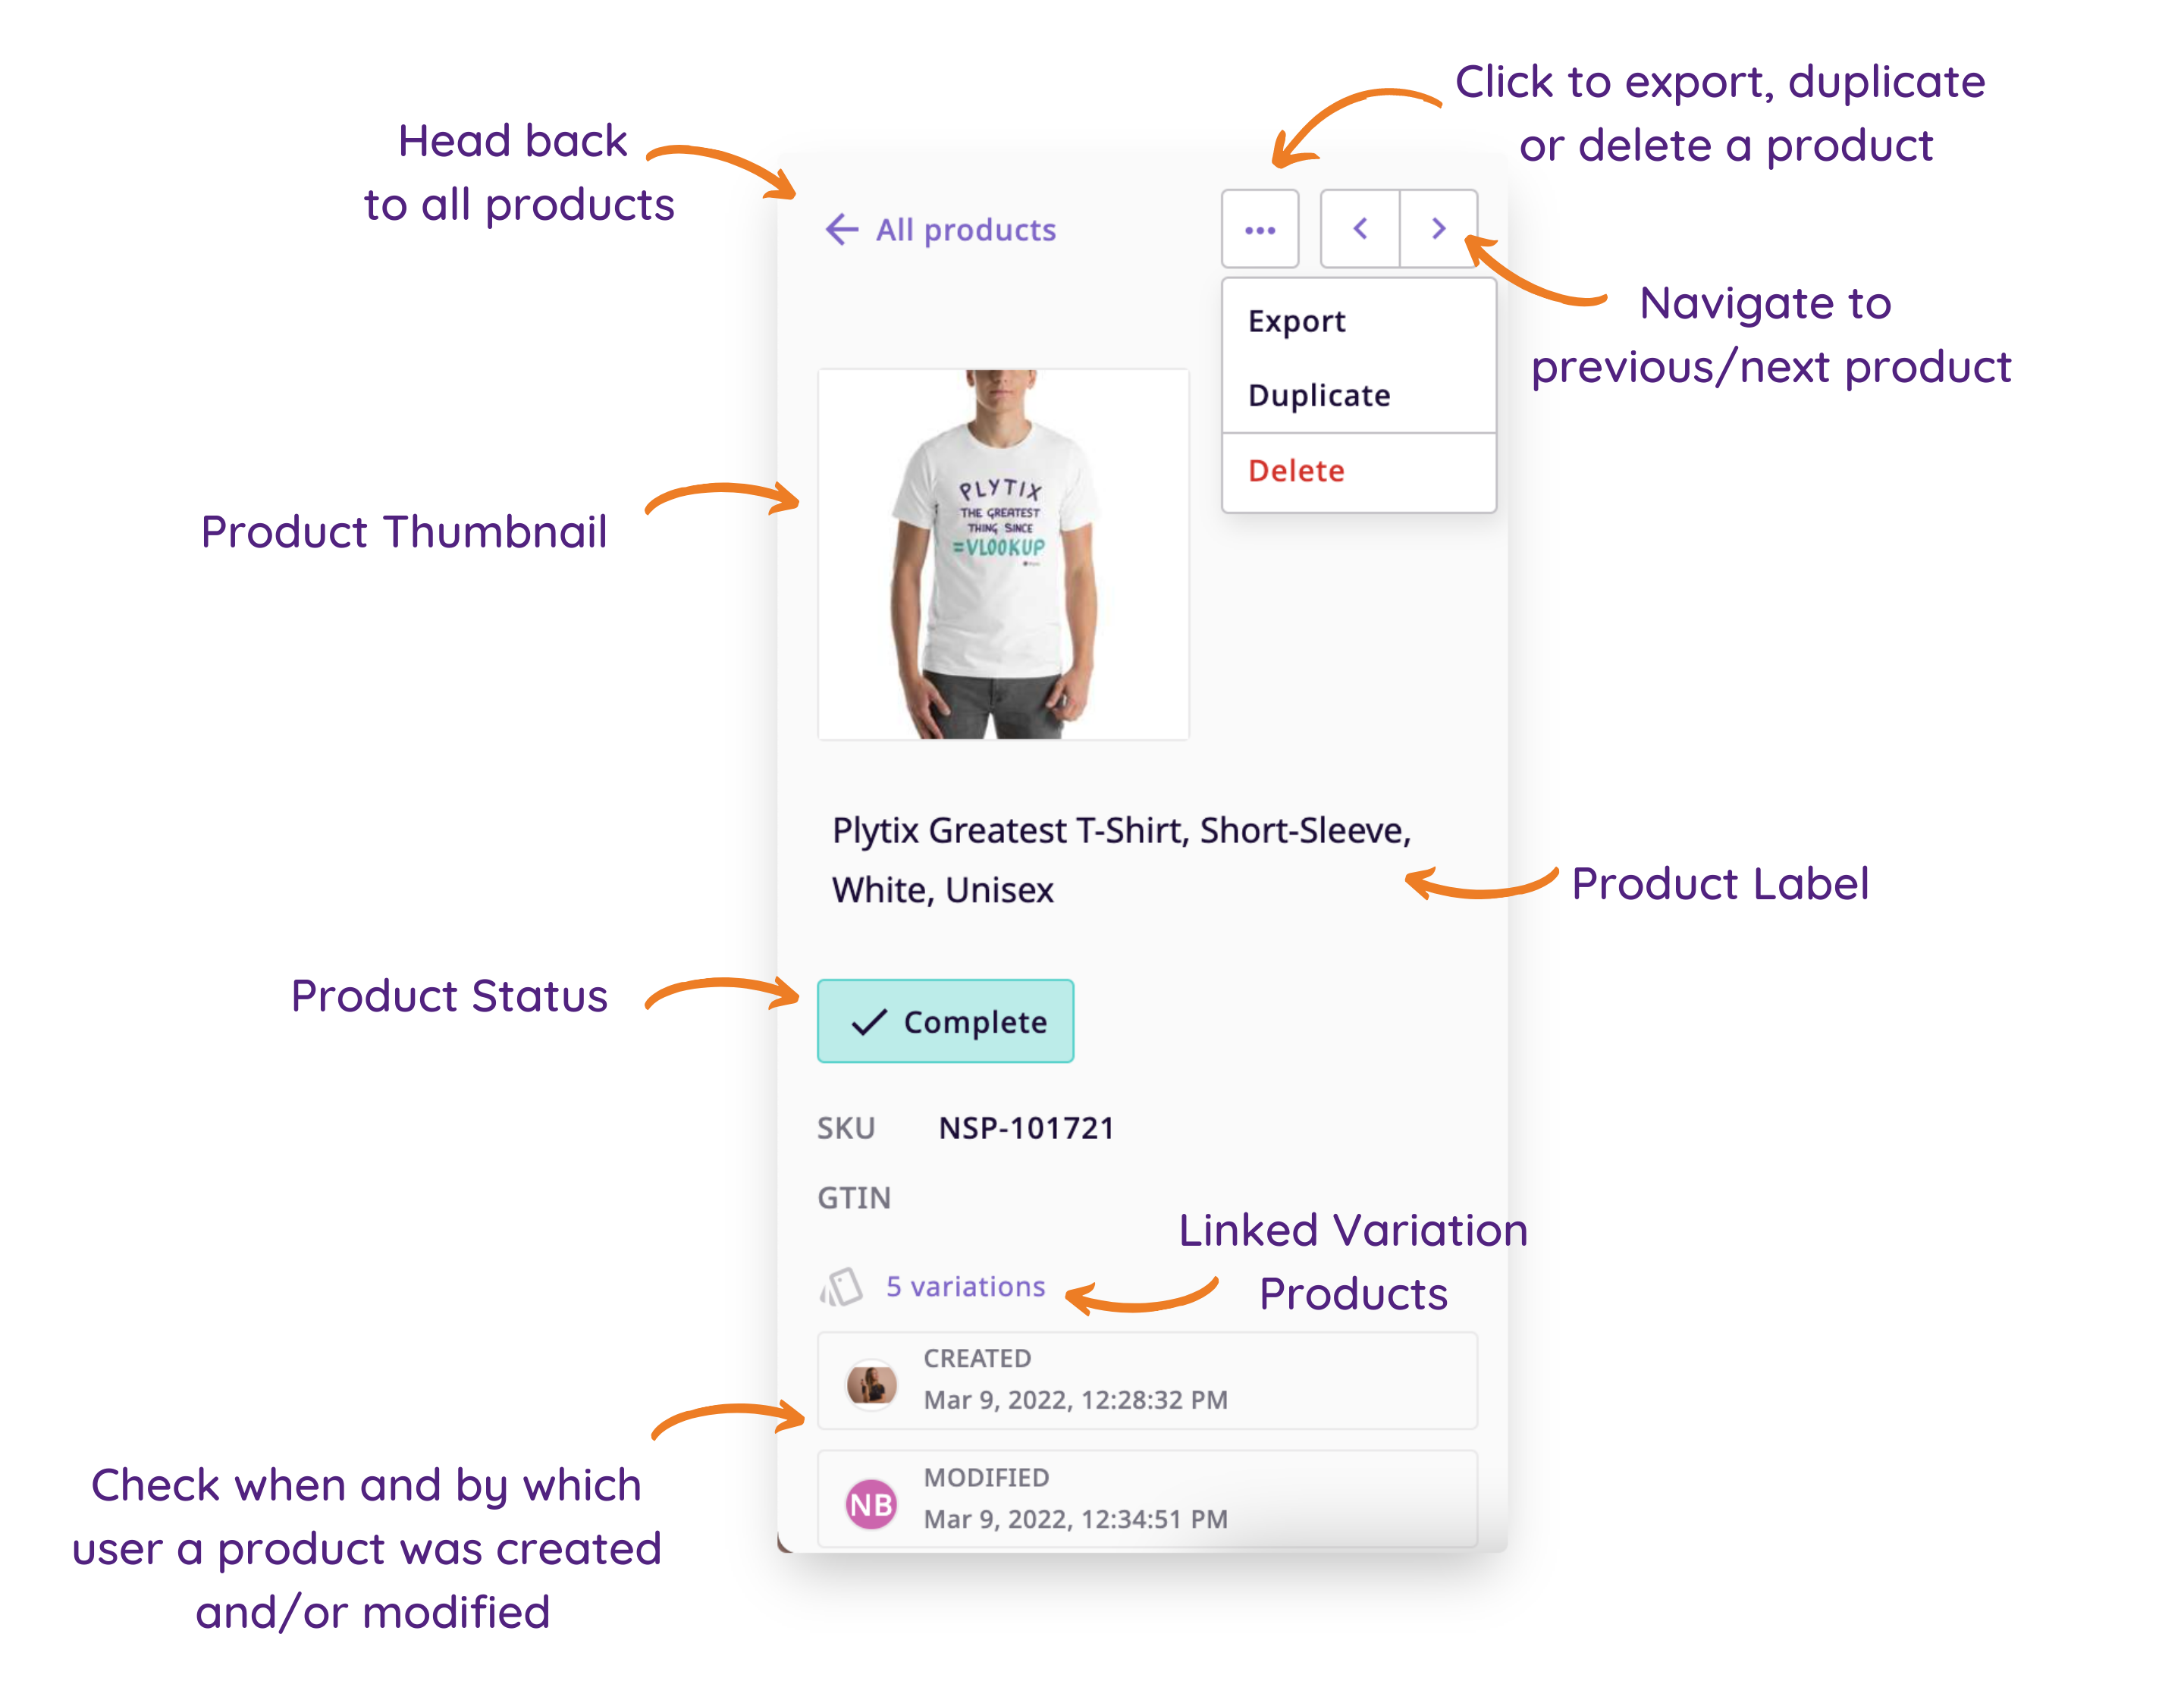 Overview of Product Detail Page